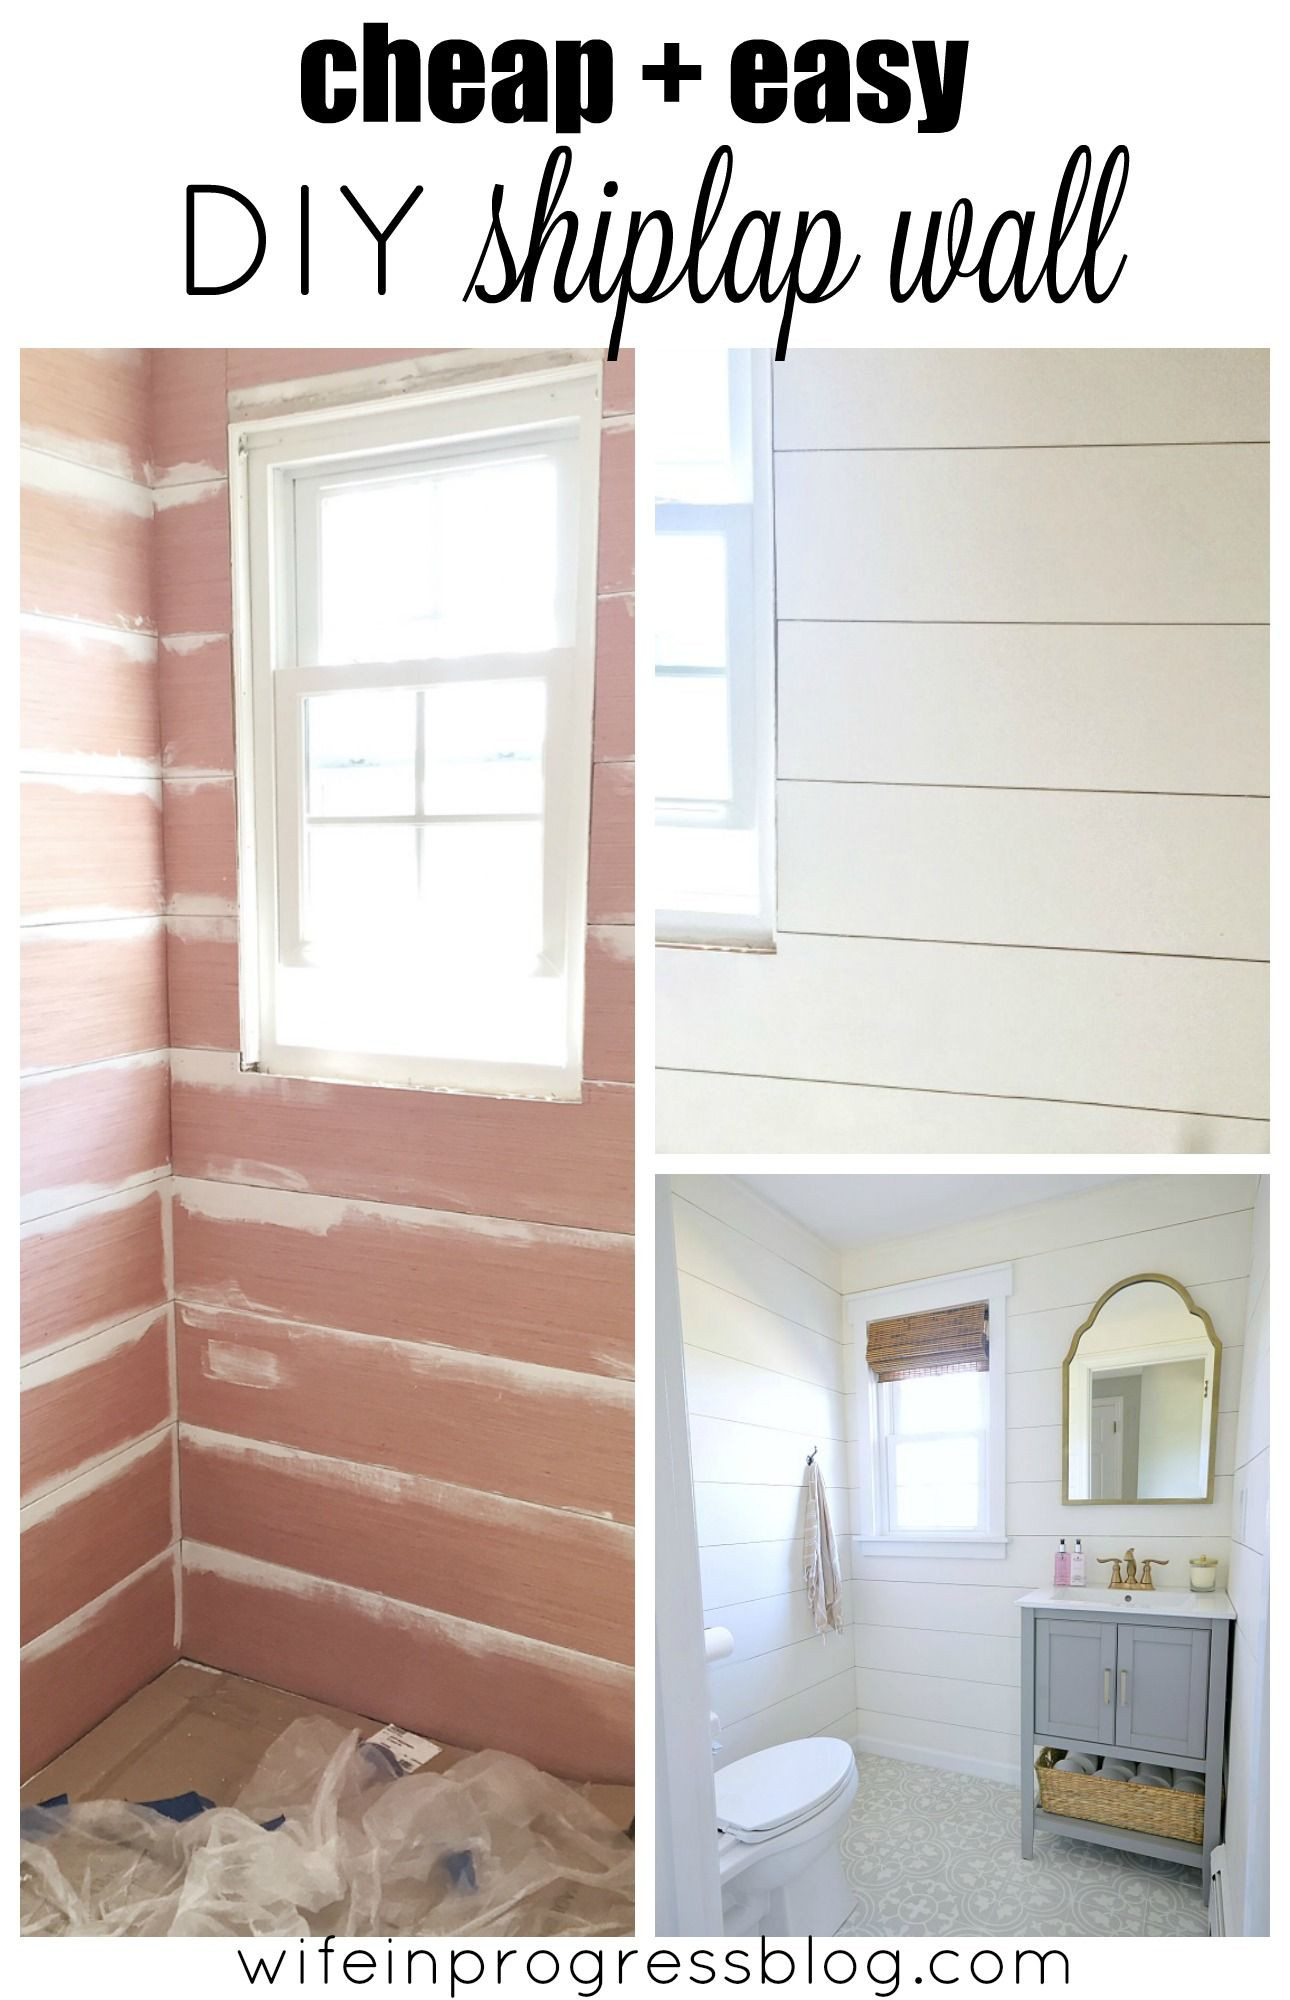 Inexpensive Bathroom Shower Wall Ideas
 Beautiful Shiplap Walls from Cheap Plywood